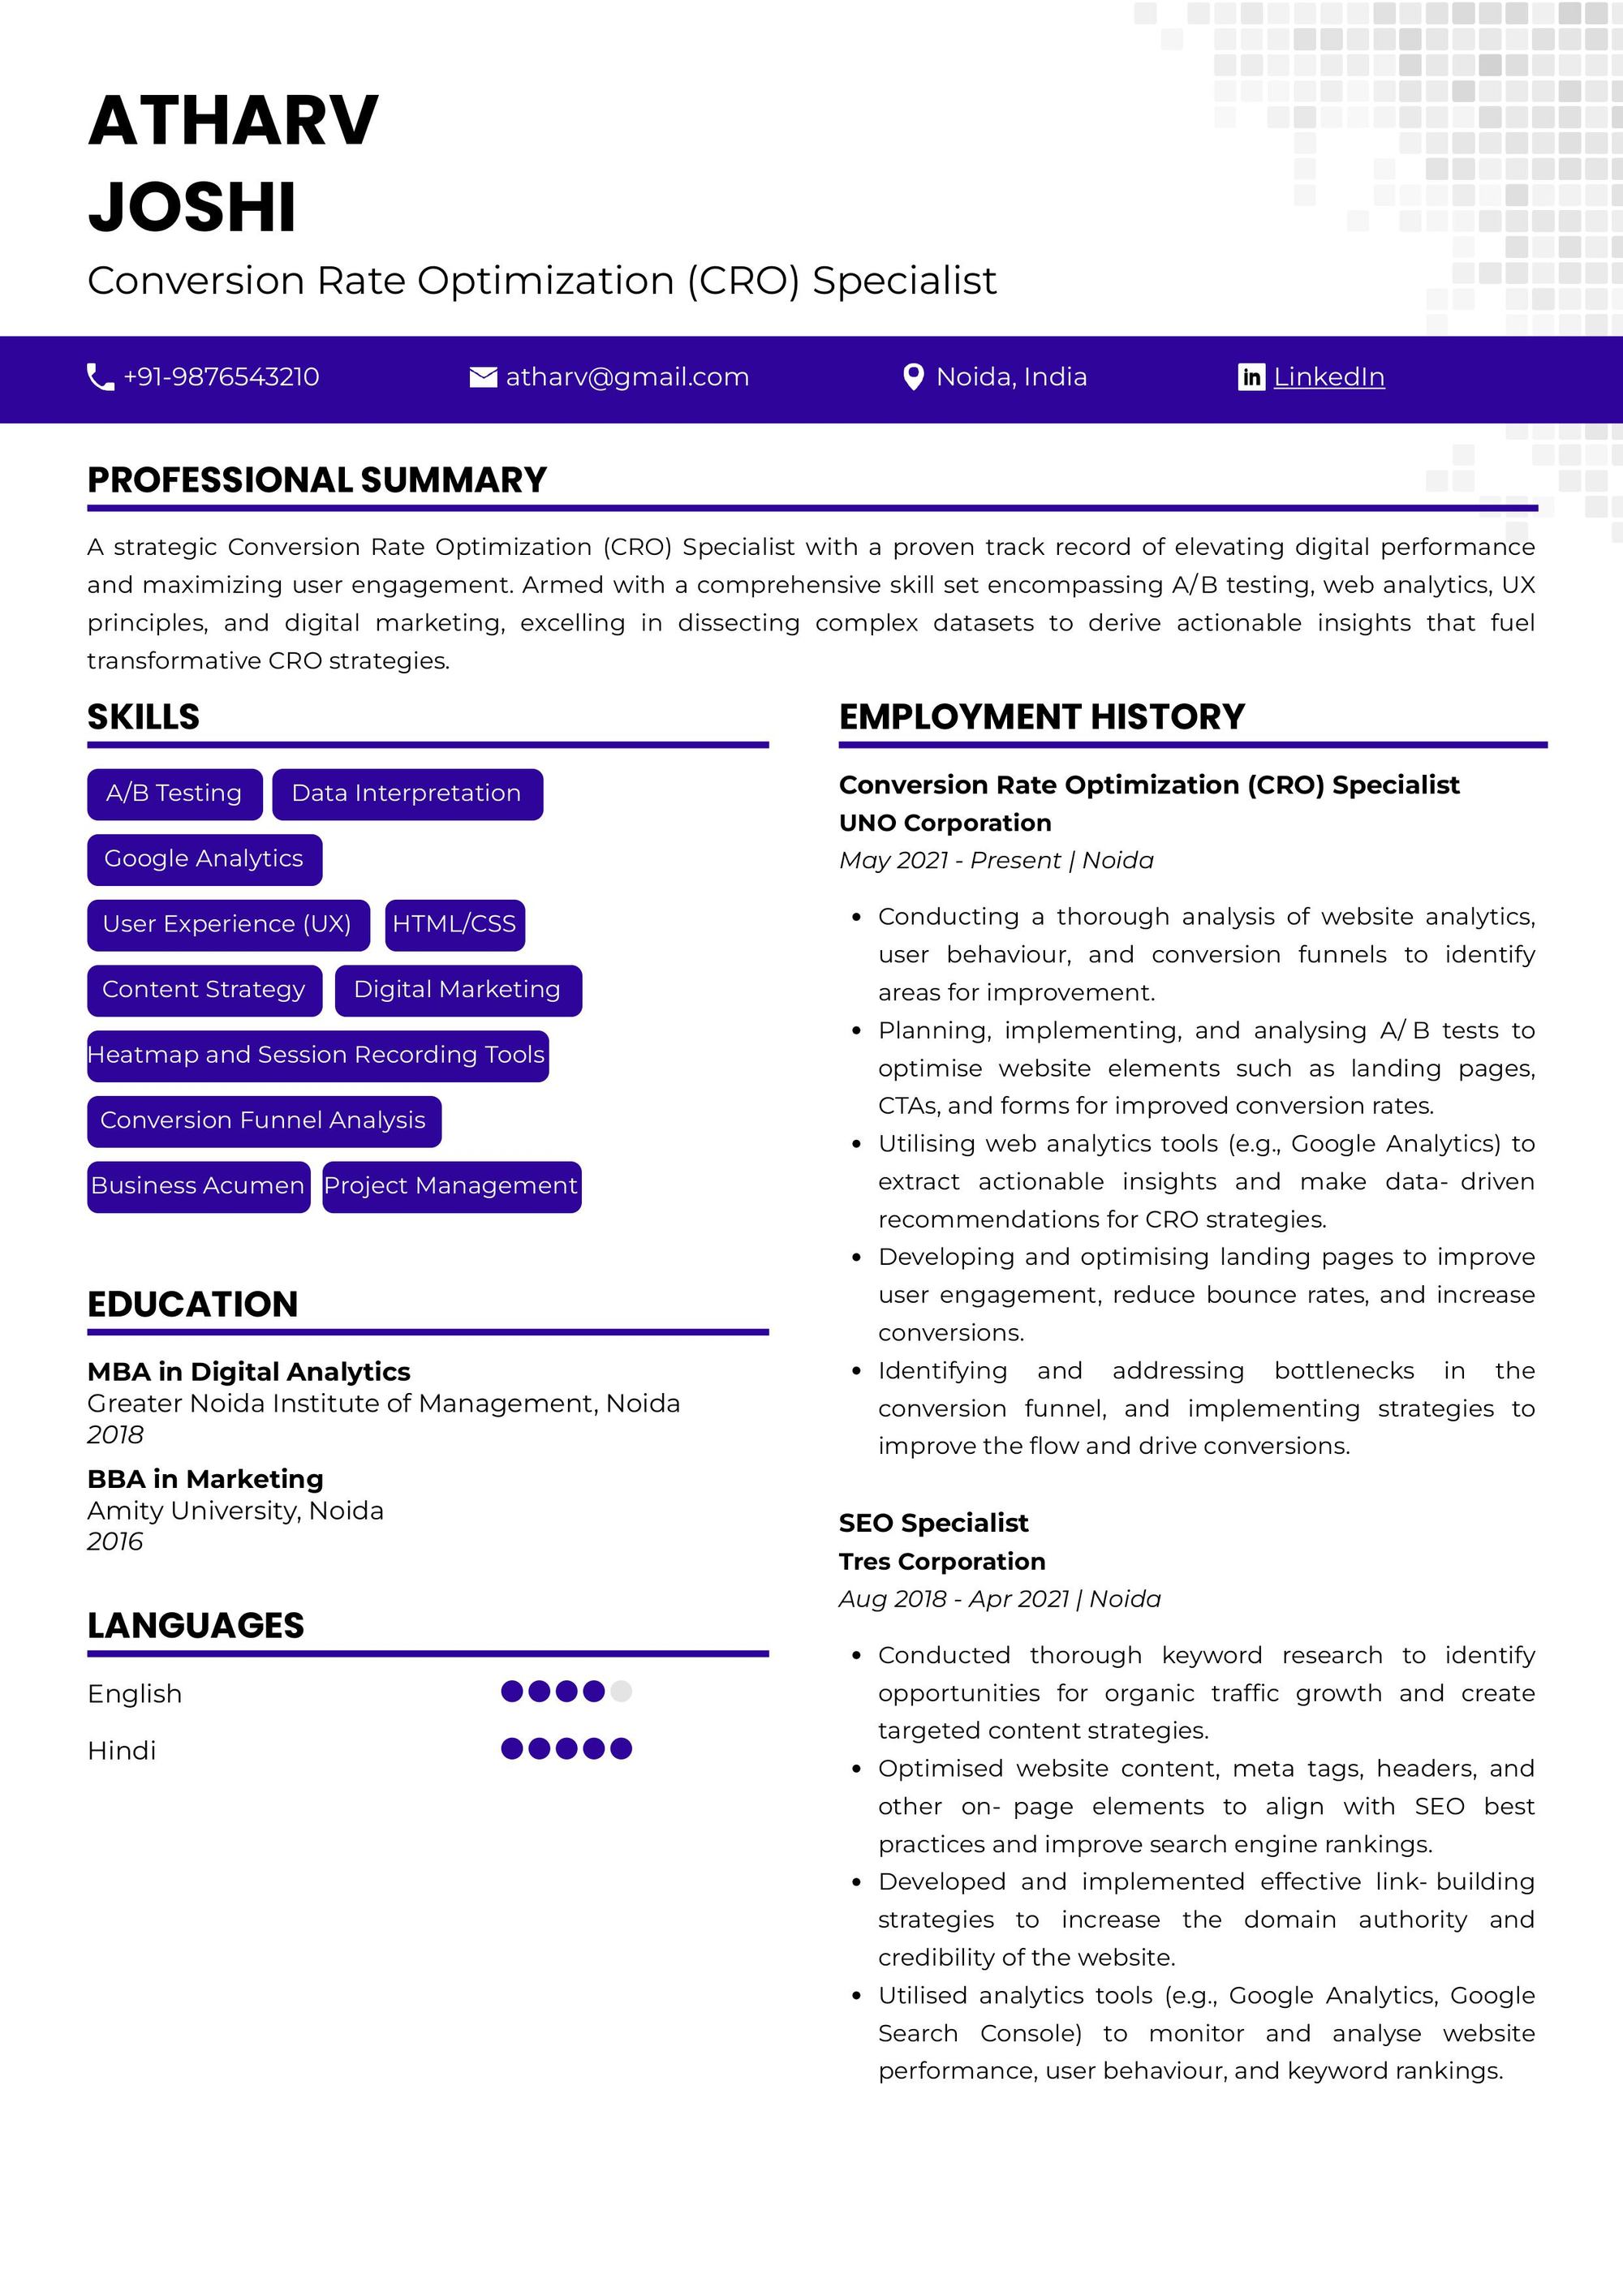 25+ Key Strengths to Make Your Resume Shine (With Powerful Examples)